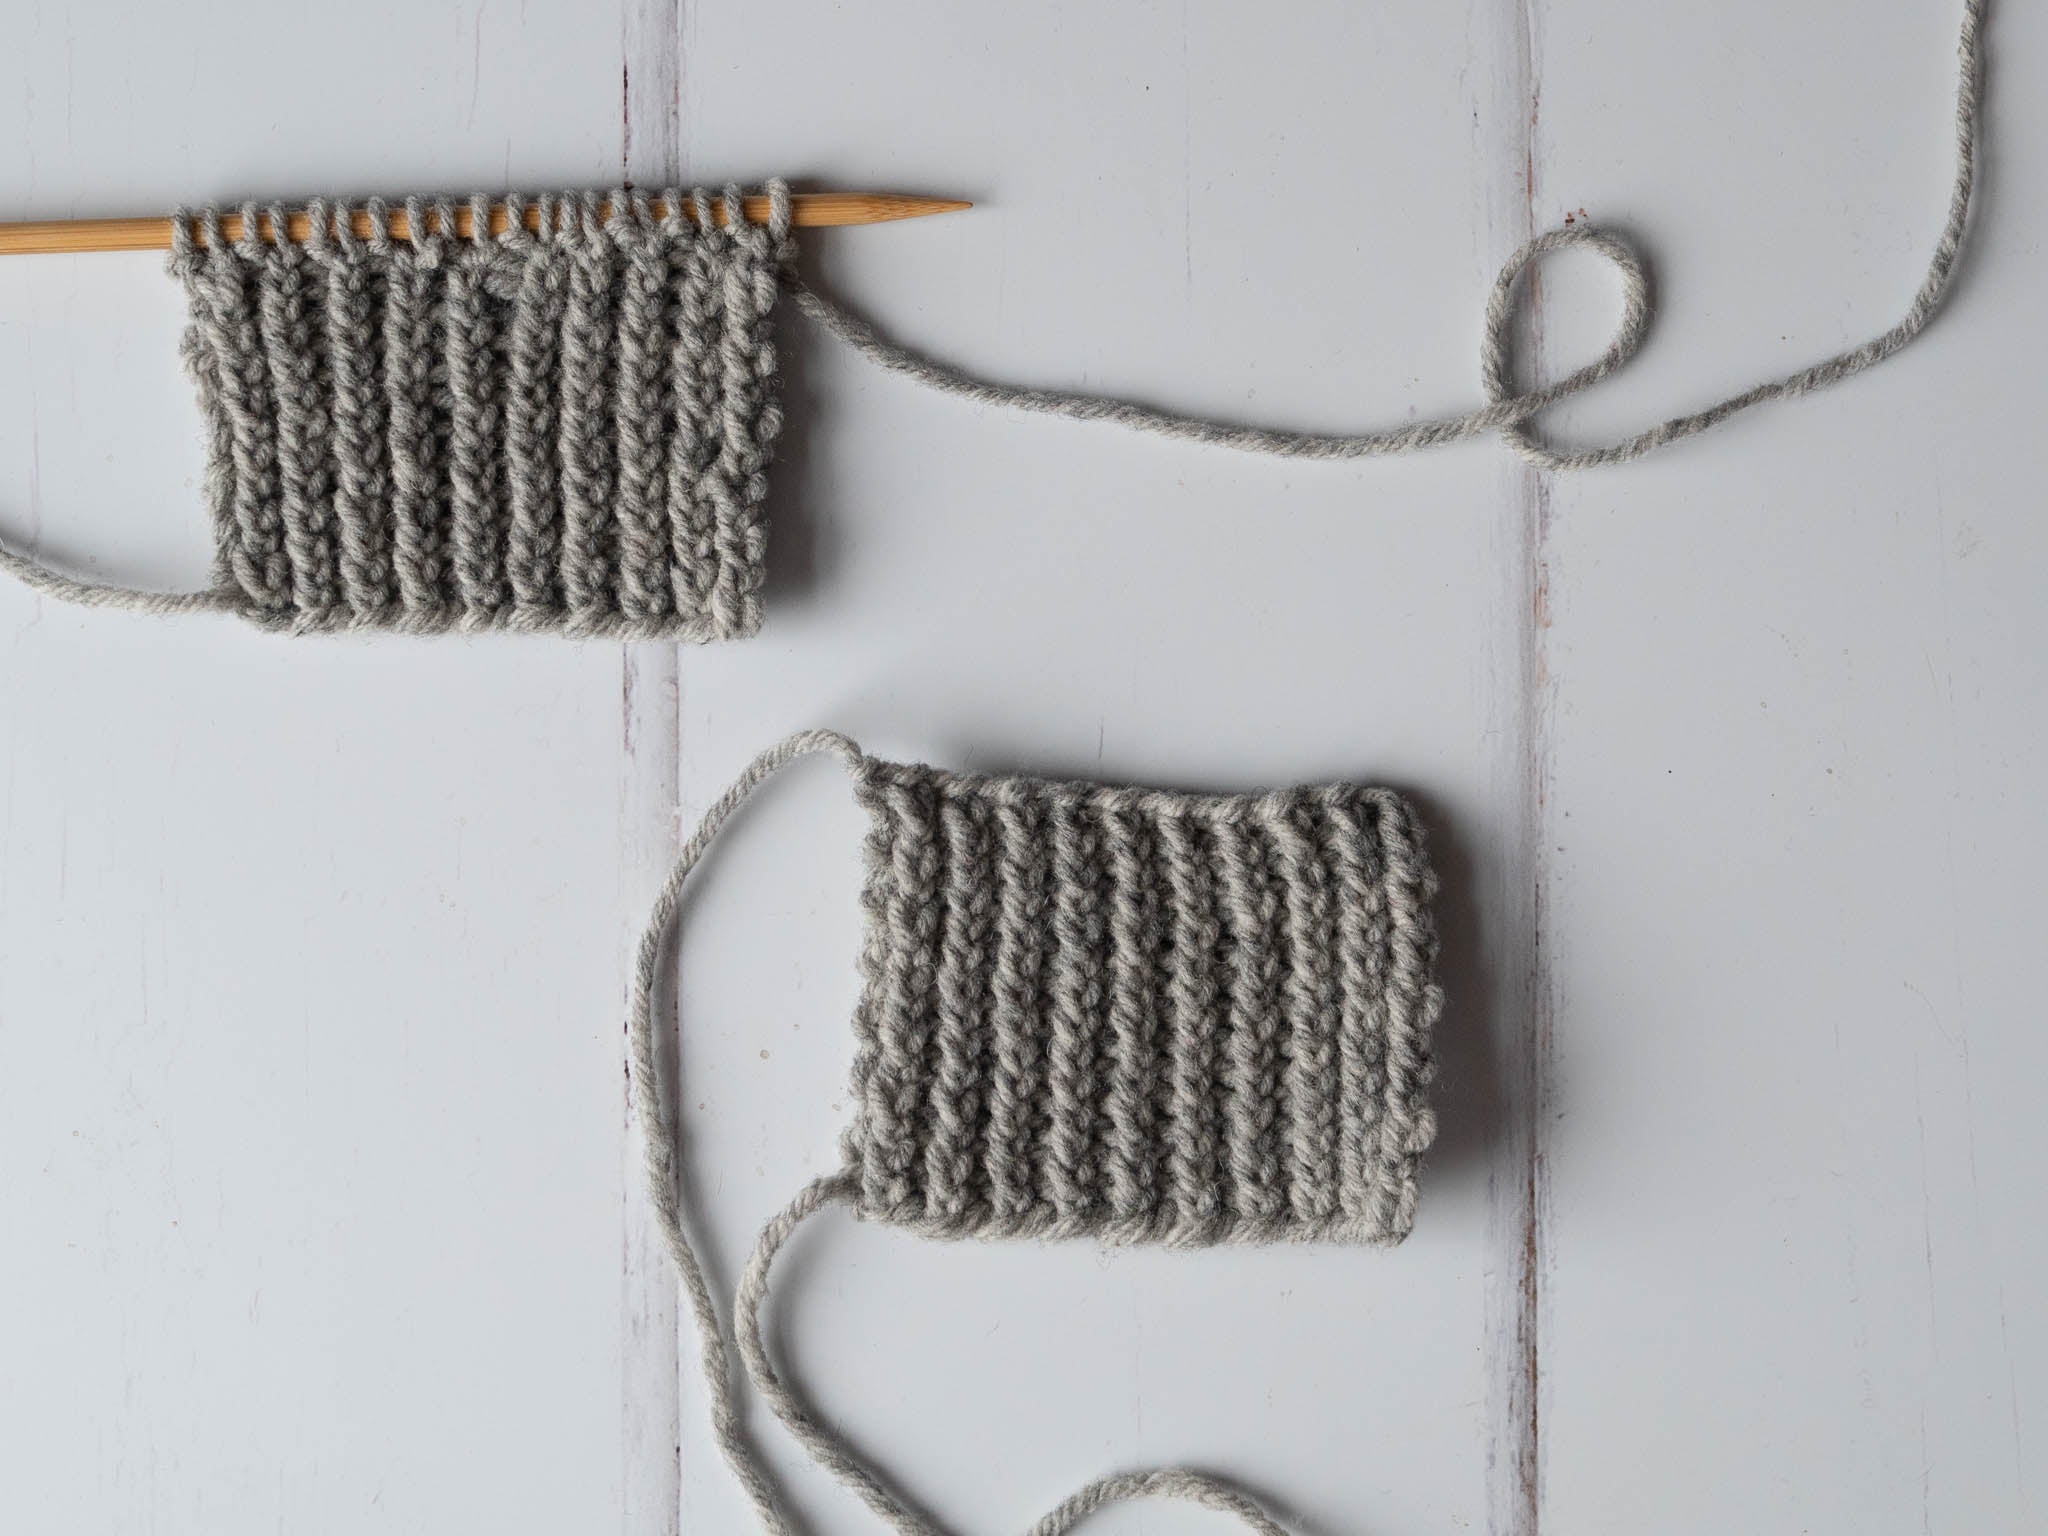 How to knit twisted rib, step by step tutorial